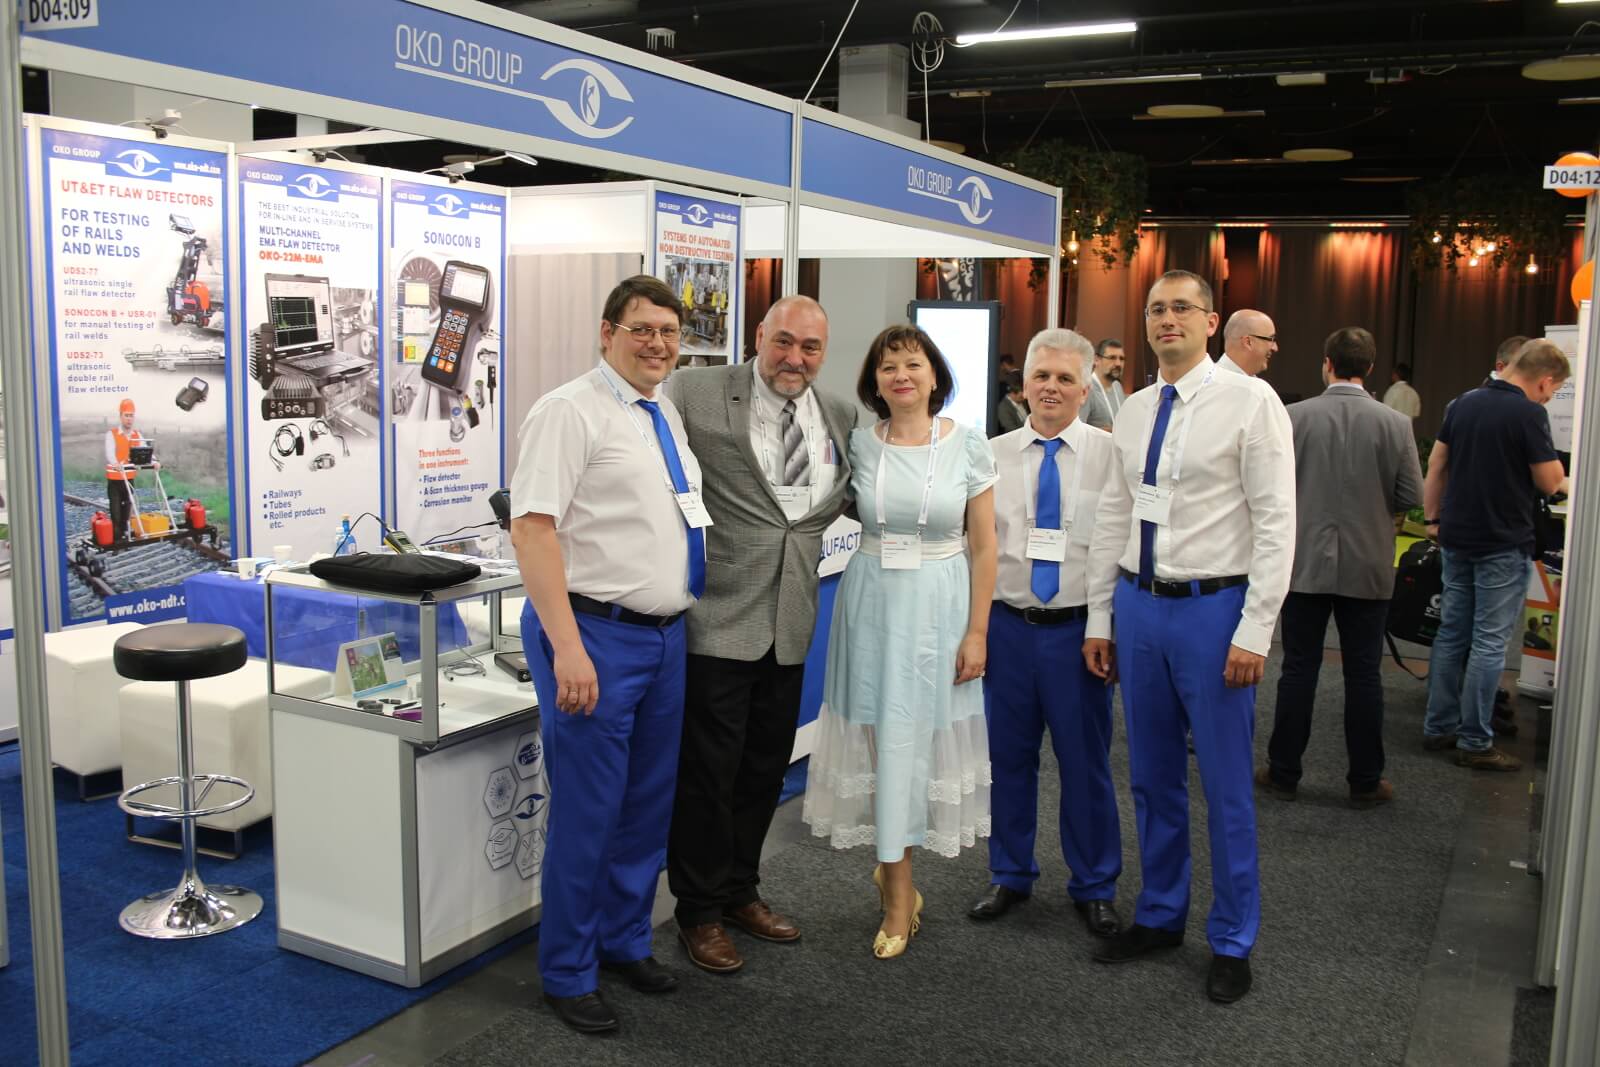 OKOndt GROUP team with David Mandina at the company's booth during the European conference of NDT 2018 (ECNDT) 